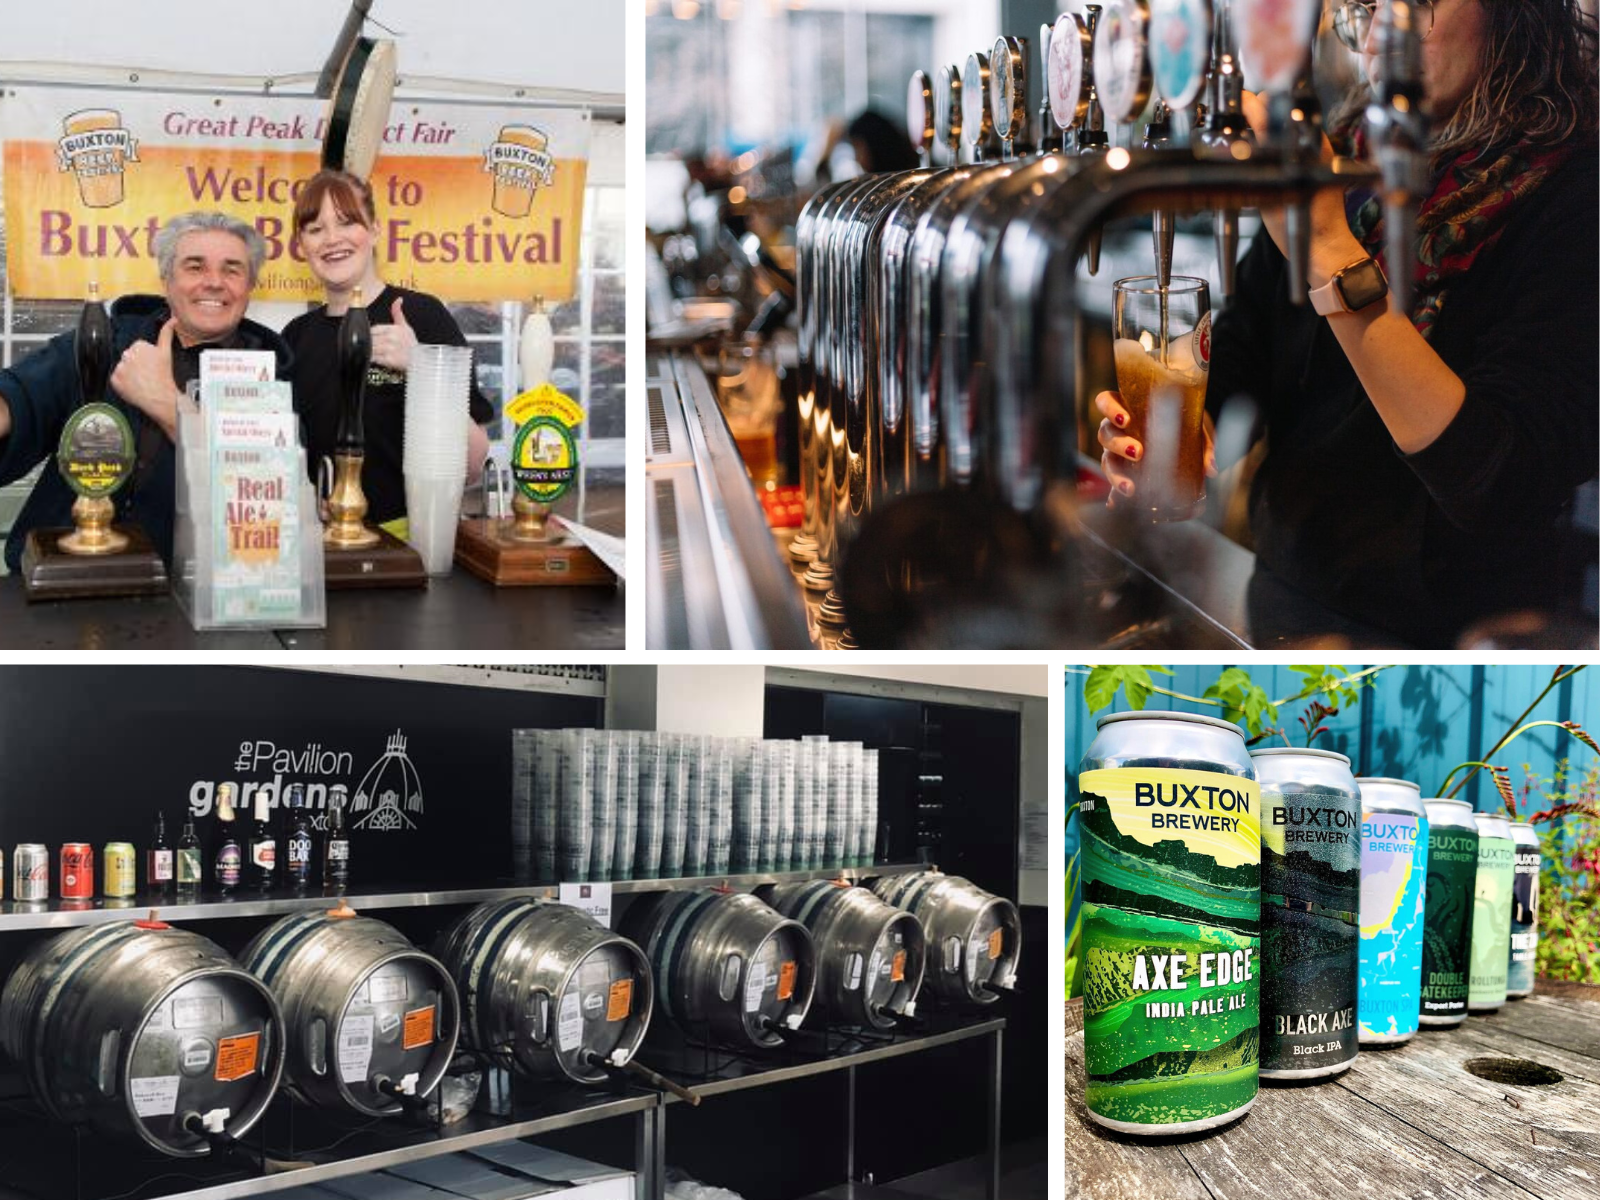 Great Peak District Fair and Buxton Beer Festival 